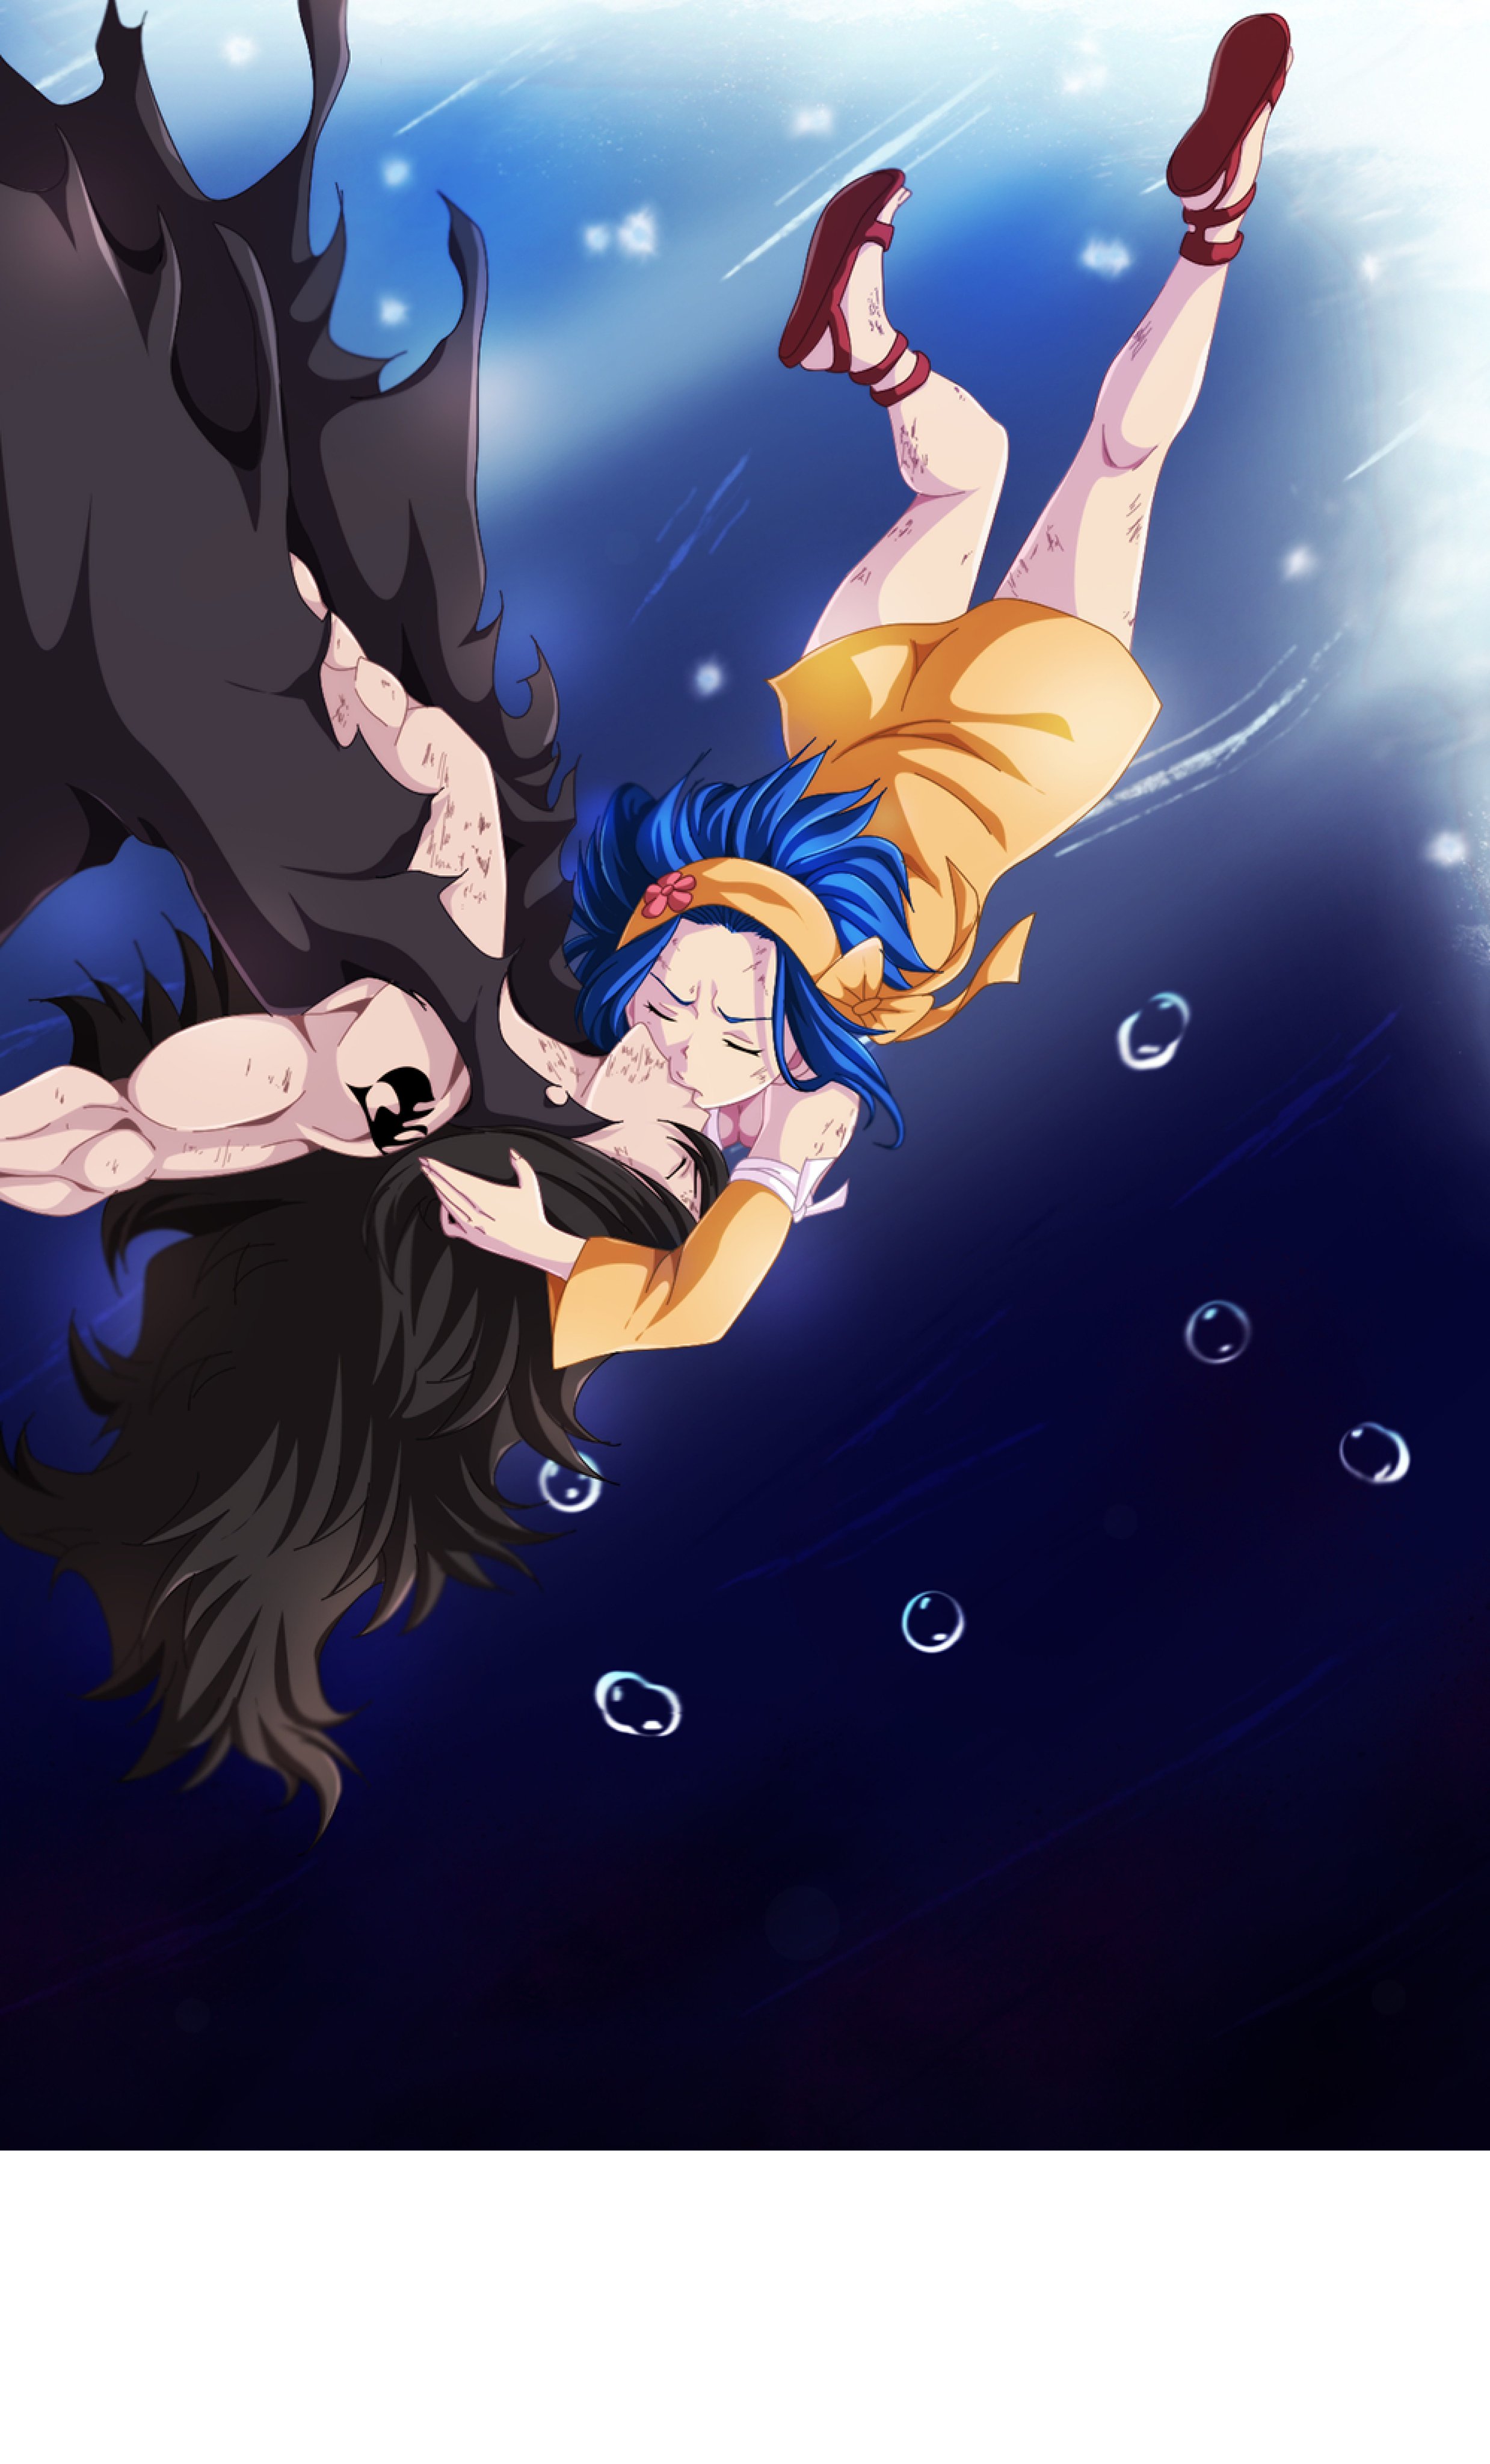 DaSy23 on "Levy and kiss :3 #Kiss #Fairytail #Levy #Redbubble https://t.co/cvWG8lxyA9 https://t.co/PyYgeMM8o9" Twitter